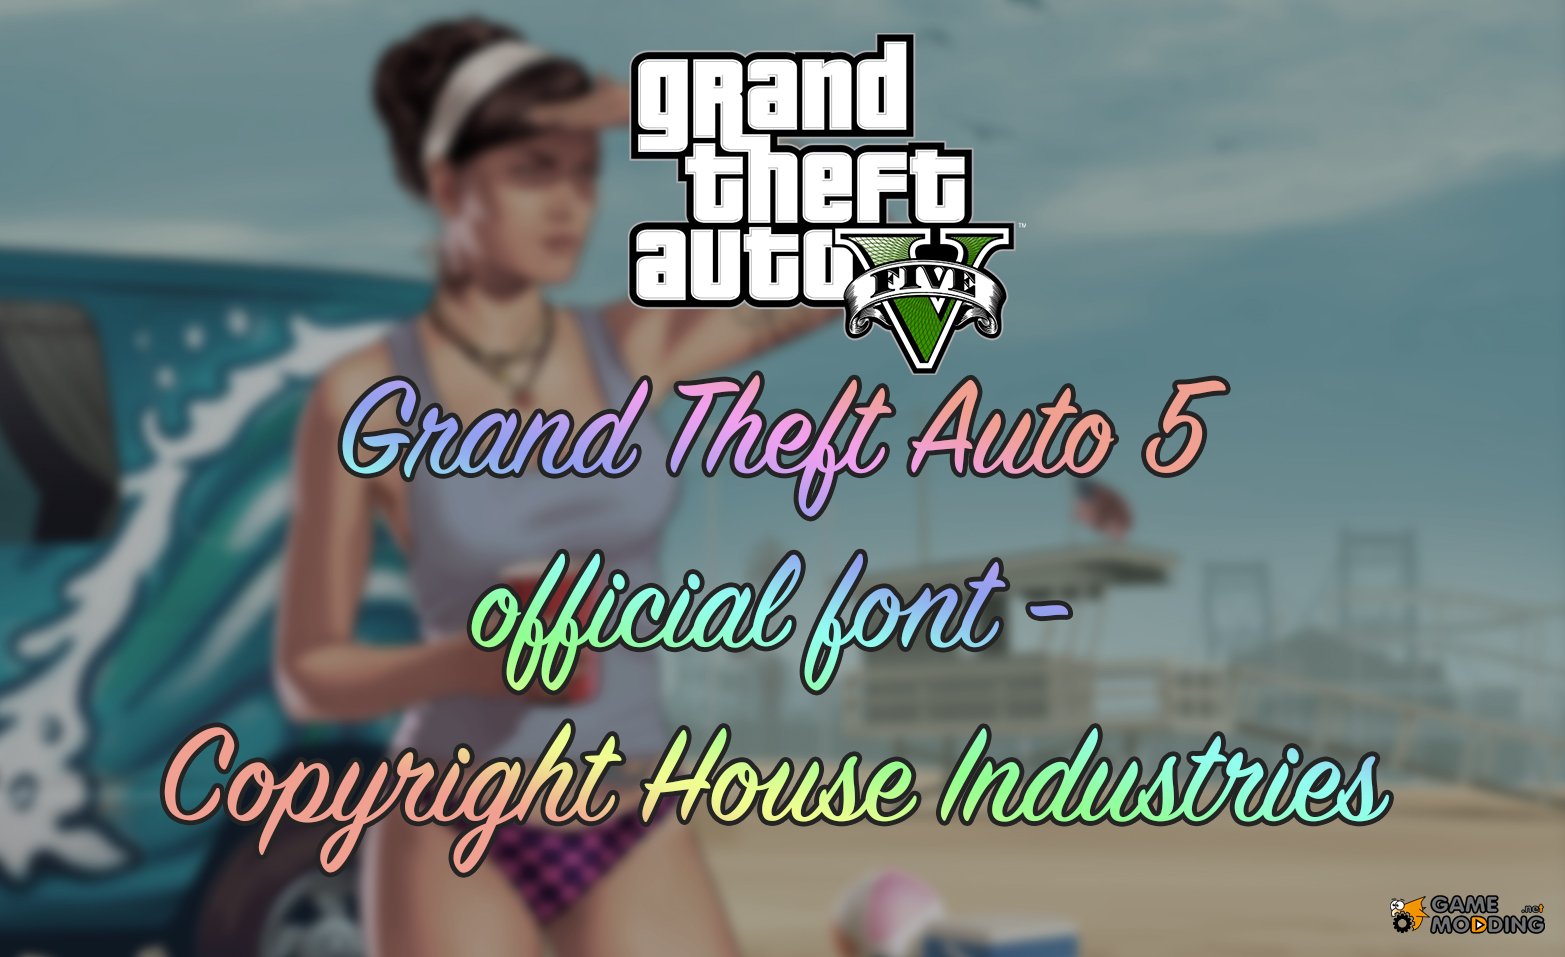 Official GTA 5 font - Copyright House Industries